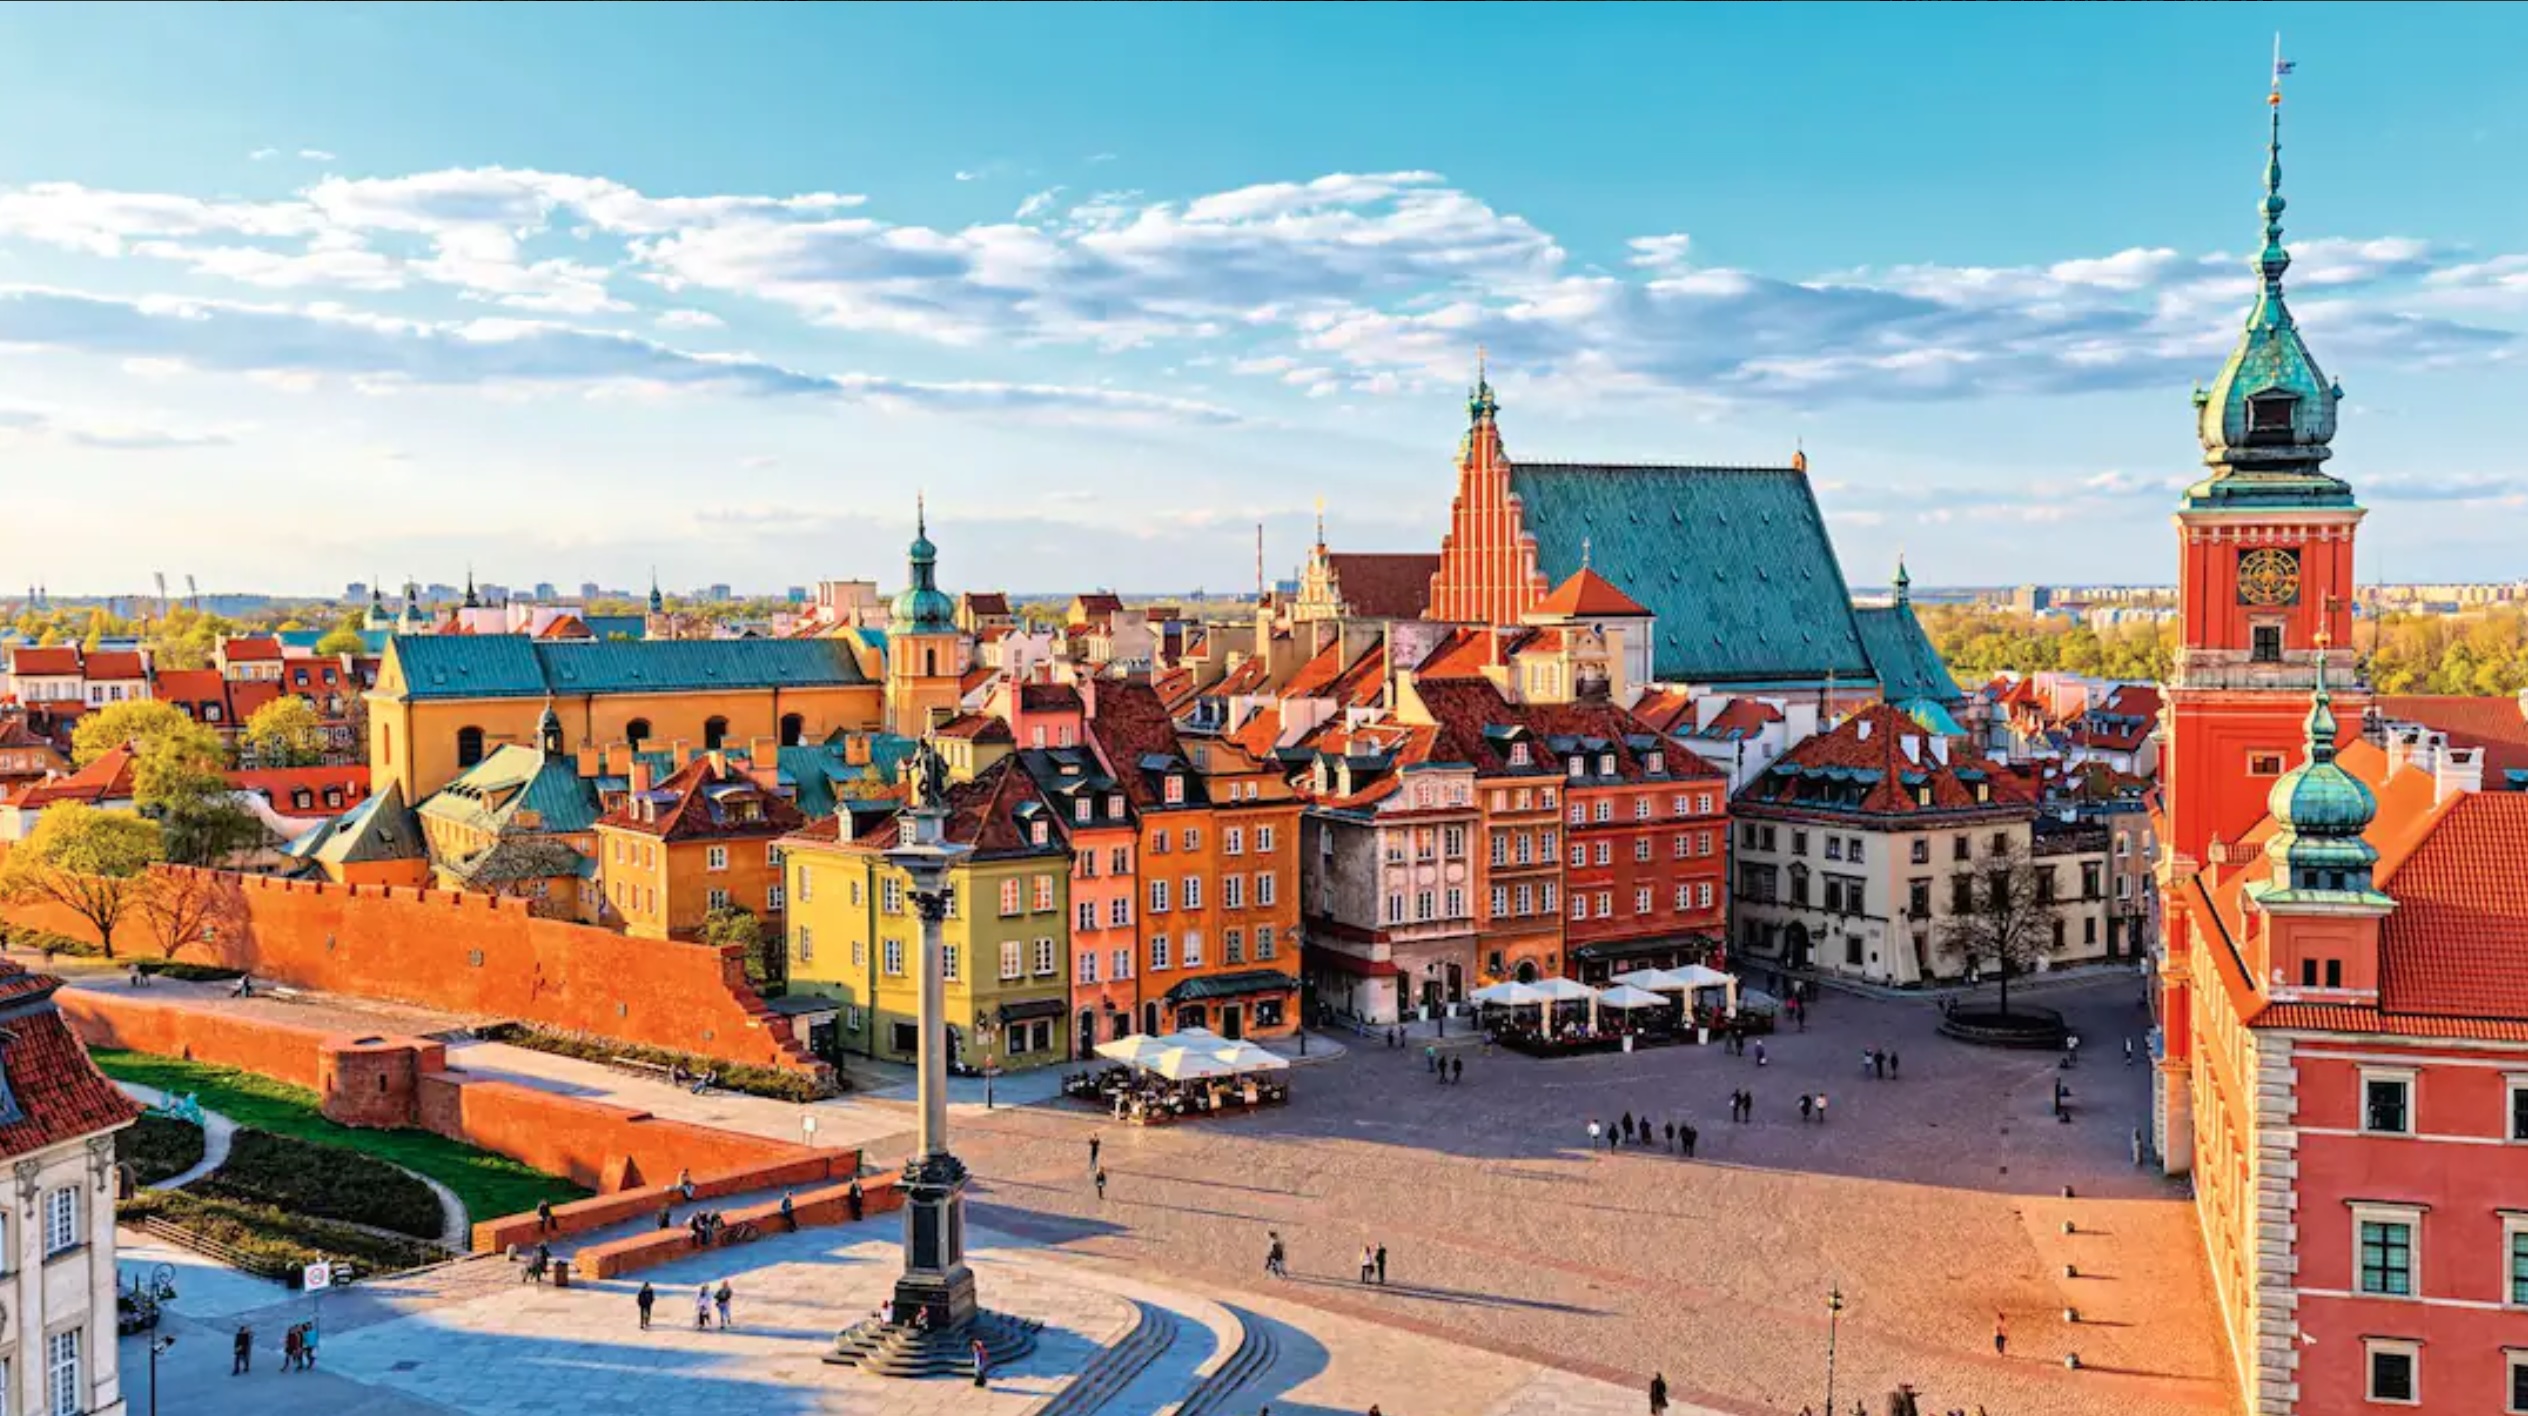 The old city in Warsaw